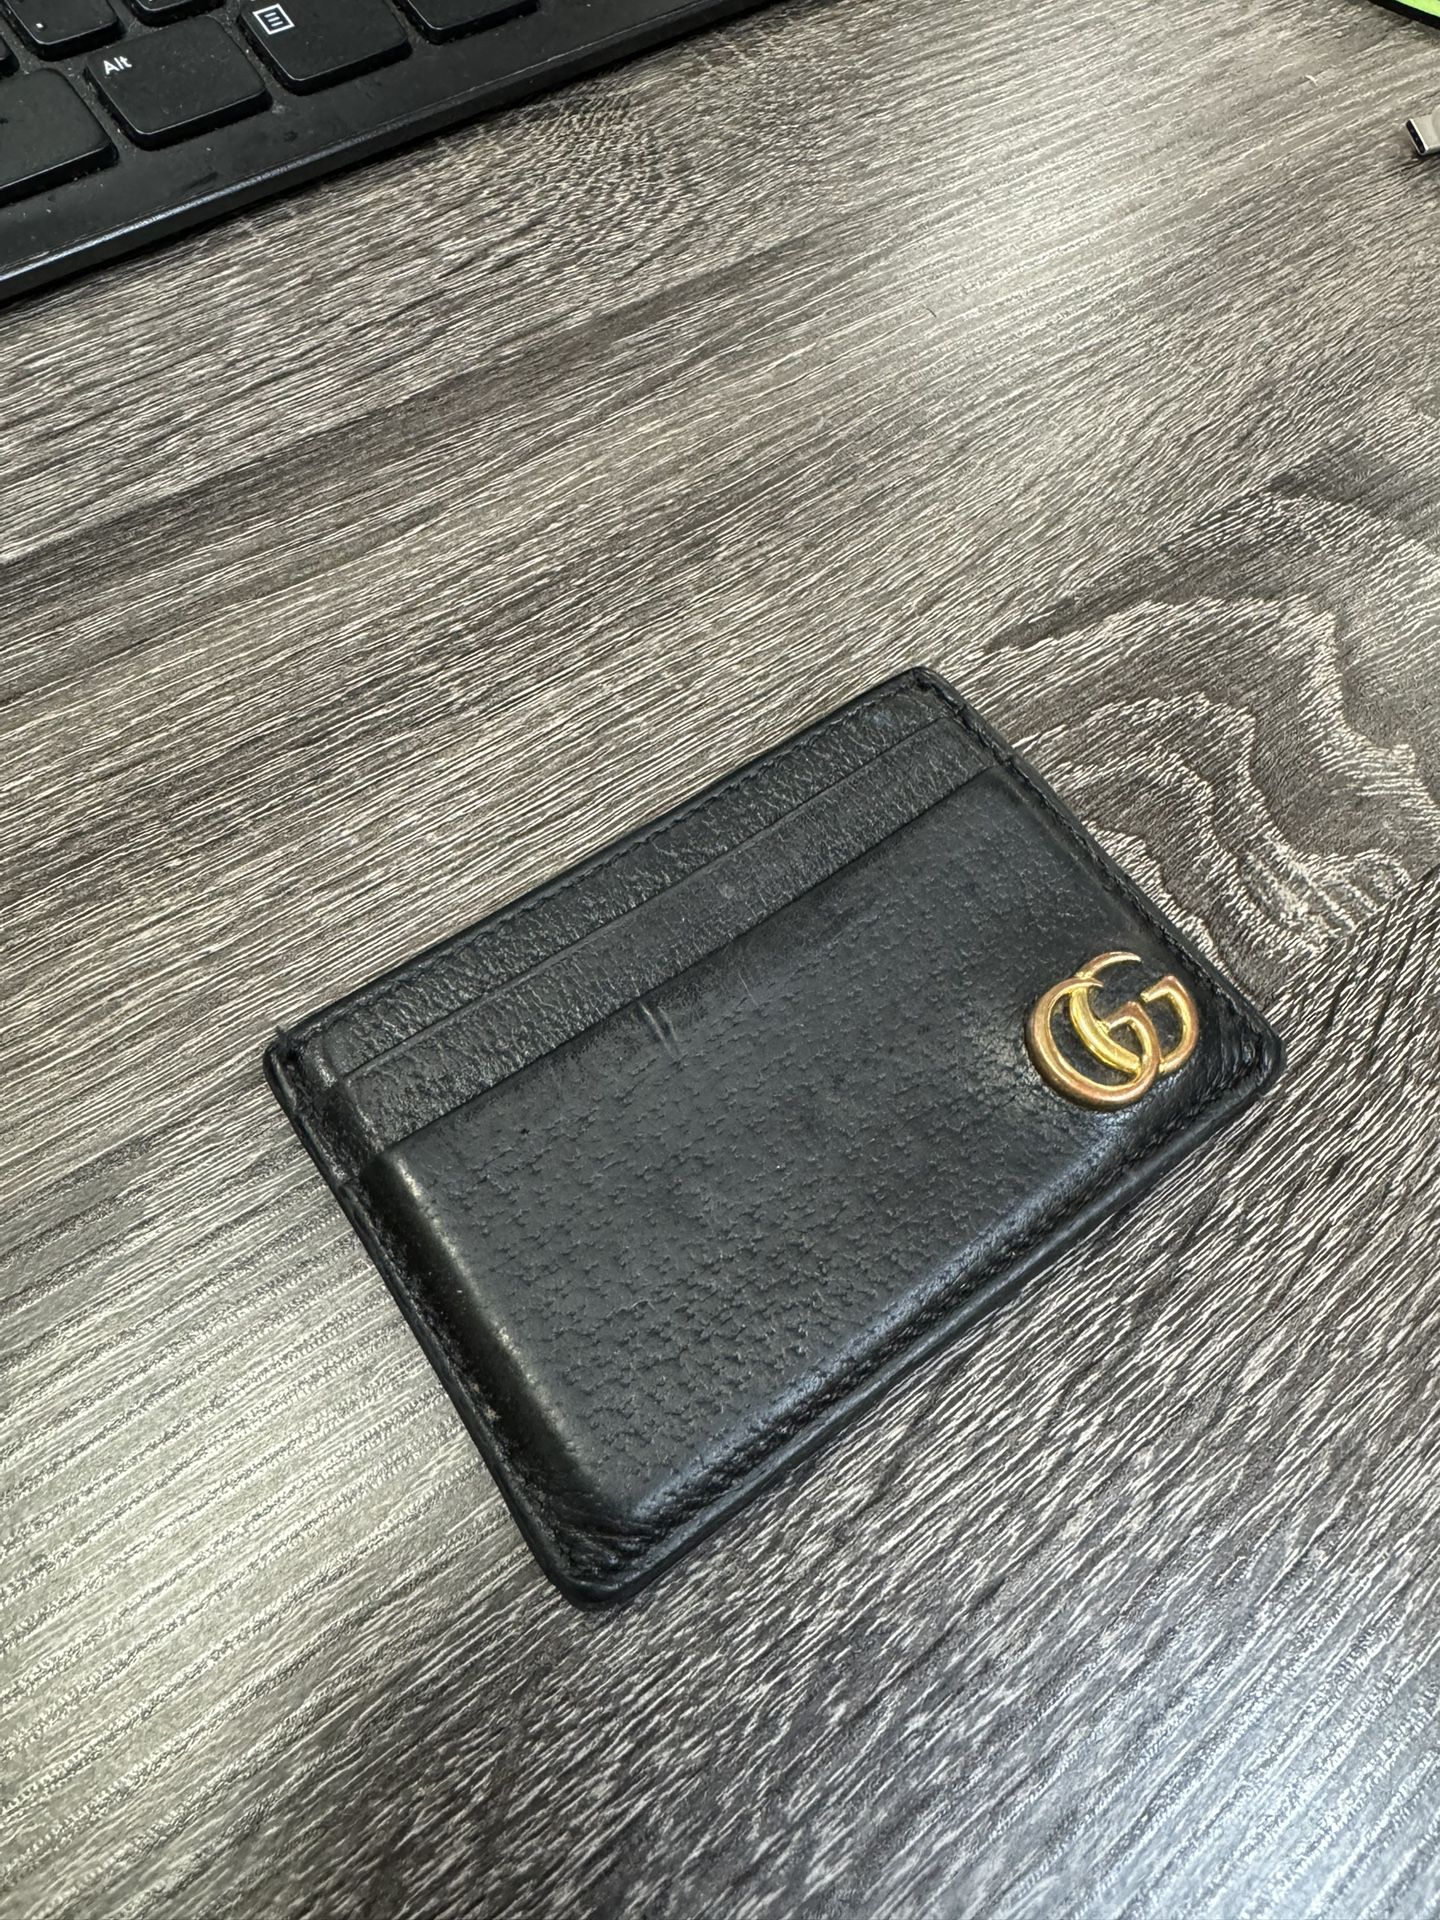 Gucci Card Holder With Money Clip 